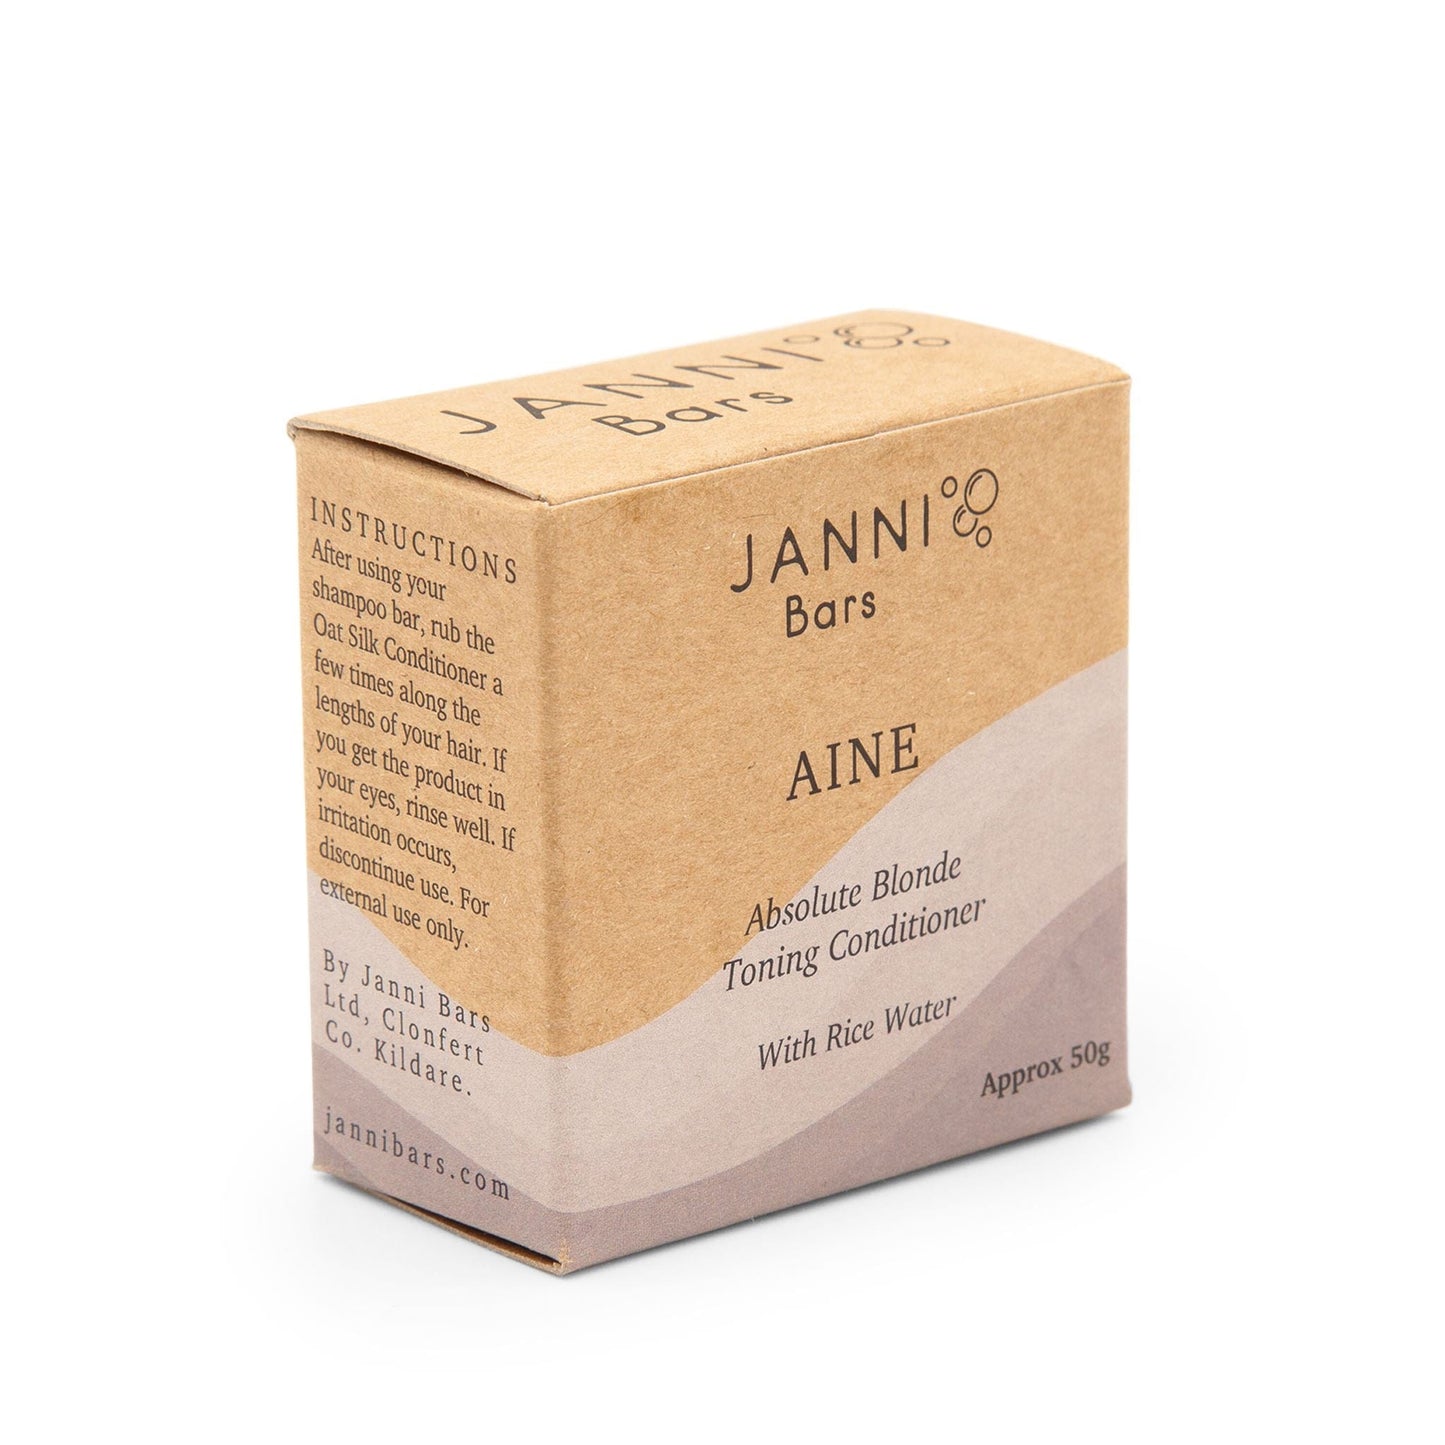 Janni Bars Conditioner Aine Toning Conditioner Bar for Blondes- Janni Bars